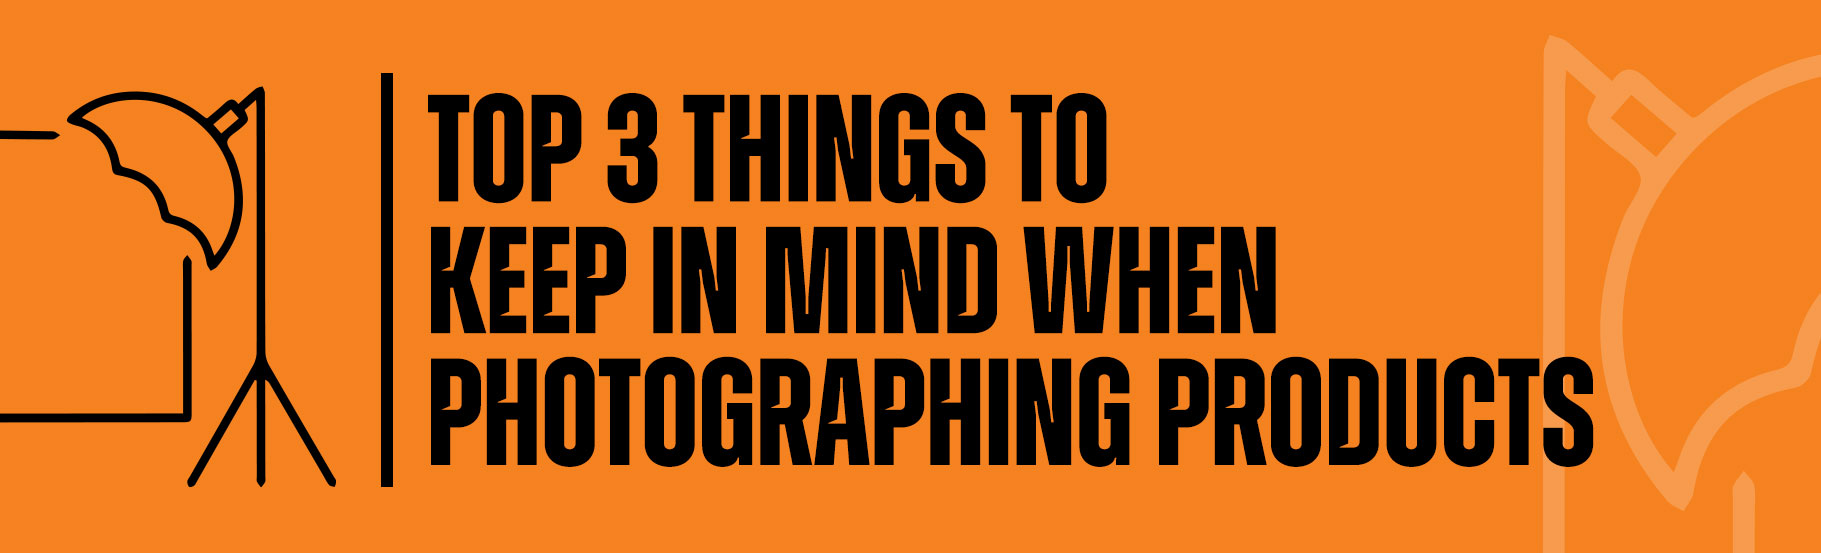 Top 3 things to keep in mind when photographing products